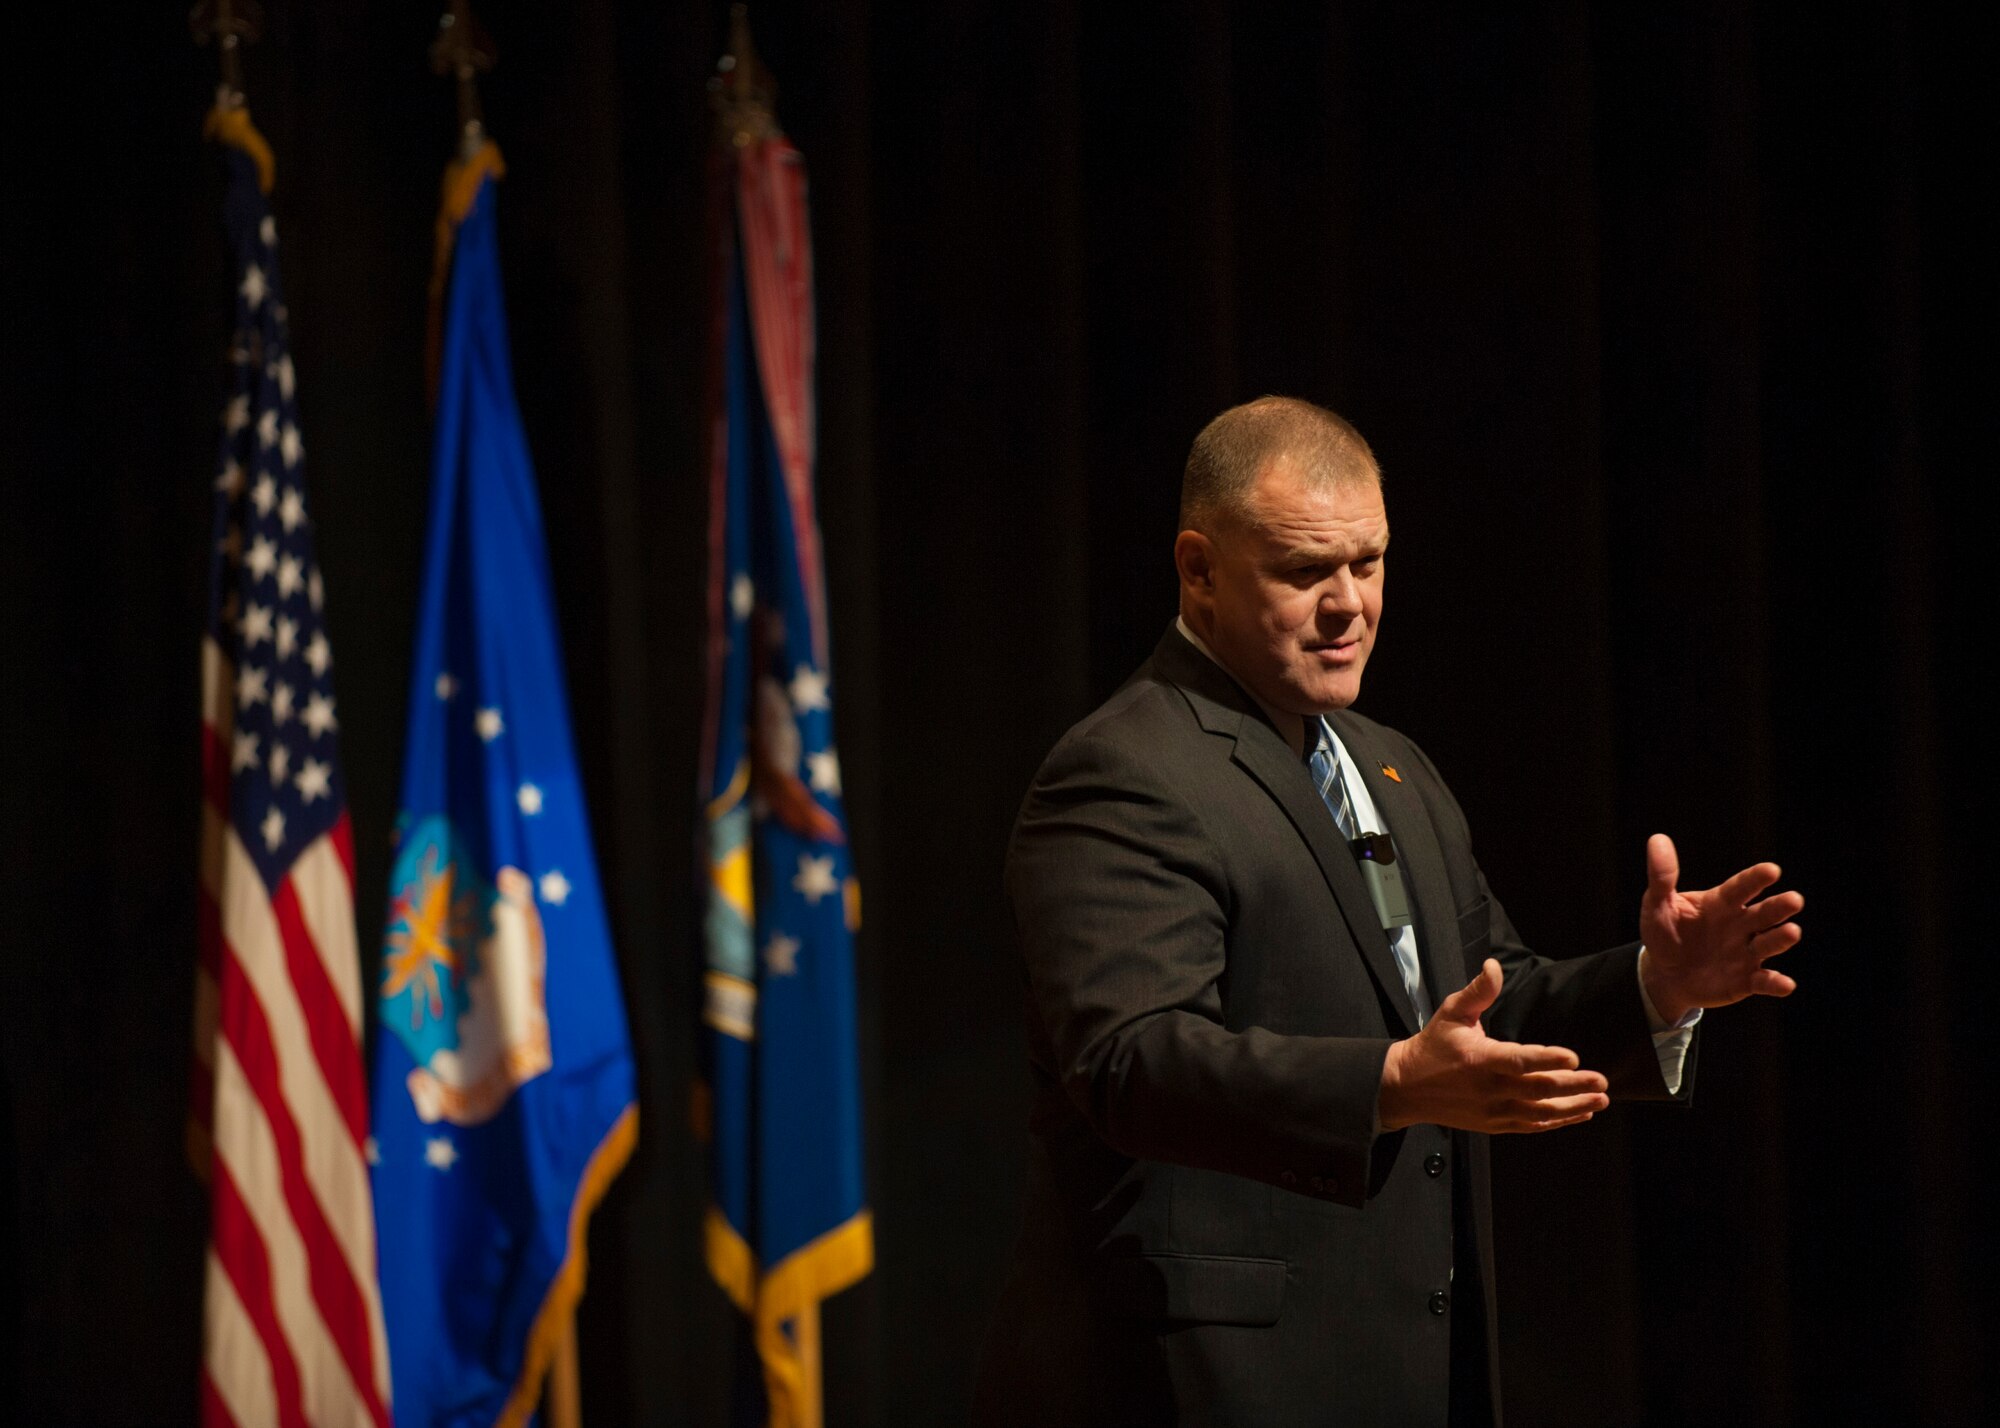 Retired Chief Master Sgt. of the Air Force James A. Roy speaks to employees of the National Air and Space Intelligence Center during his tour of Wright-Patterson Air Force Base, Ohio, Friday, Jan. 29, 2016. Roy entered into the Air Force in September of 1982 and retired after 31 years of service. (U.S. Air Force photo by Senior Airman Justyn Freeman)